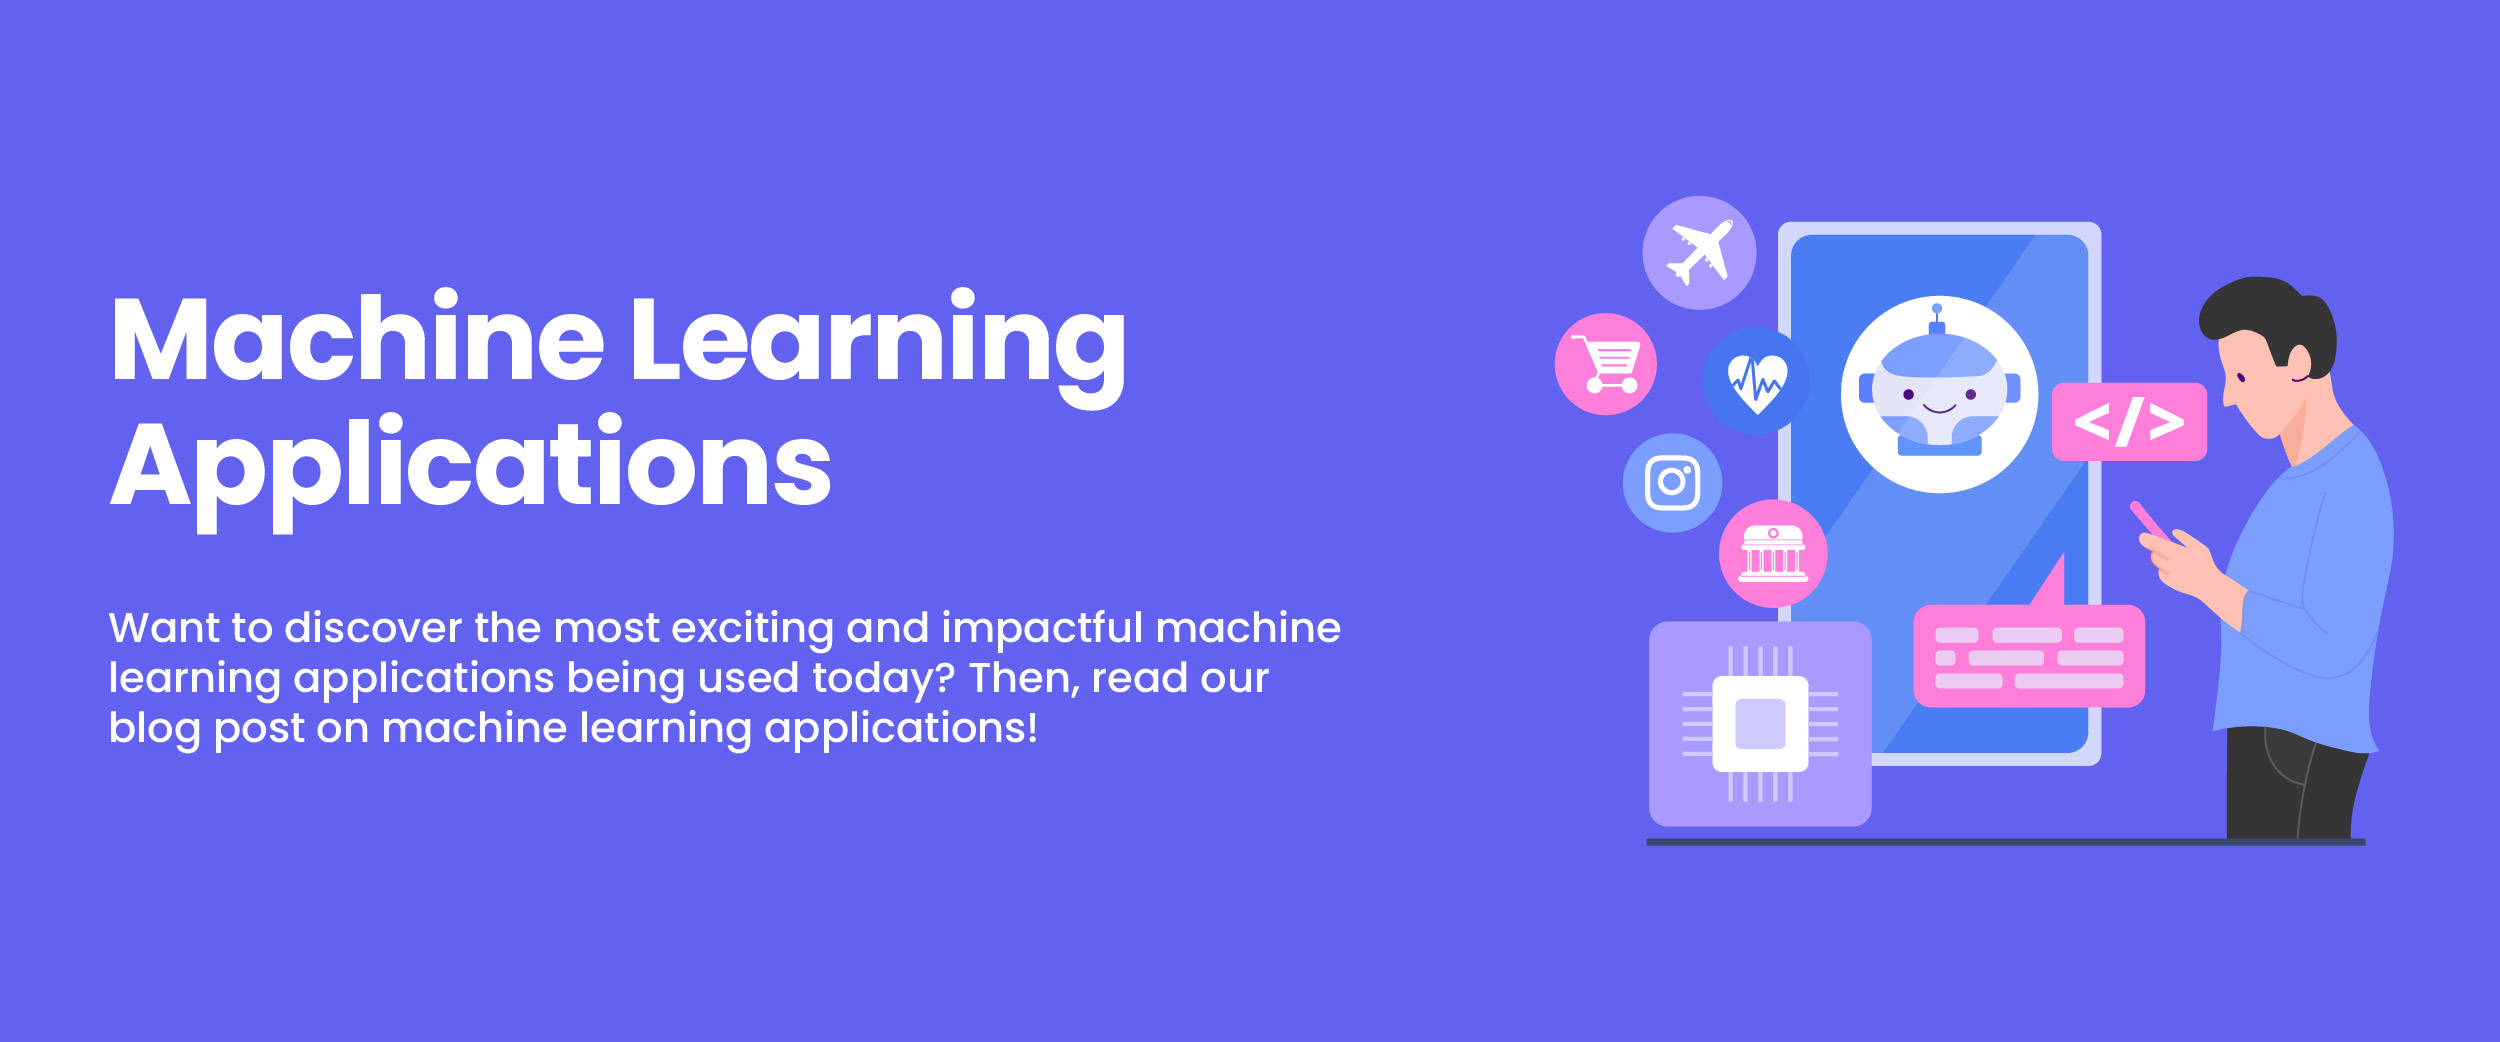 Machine learning applications